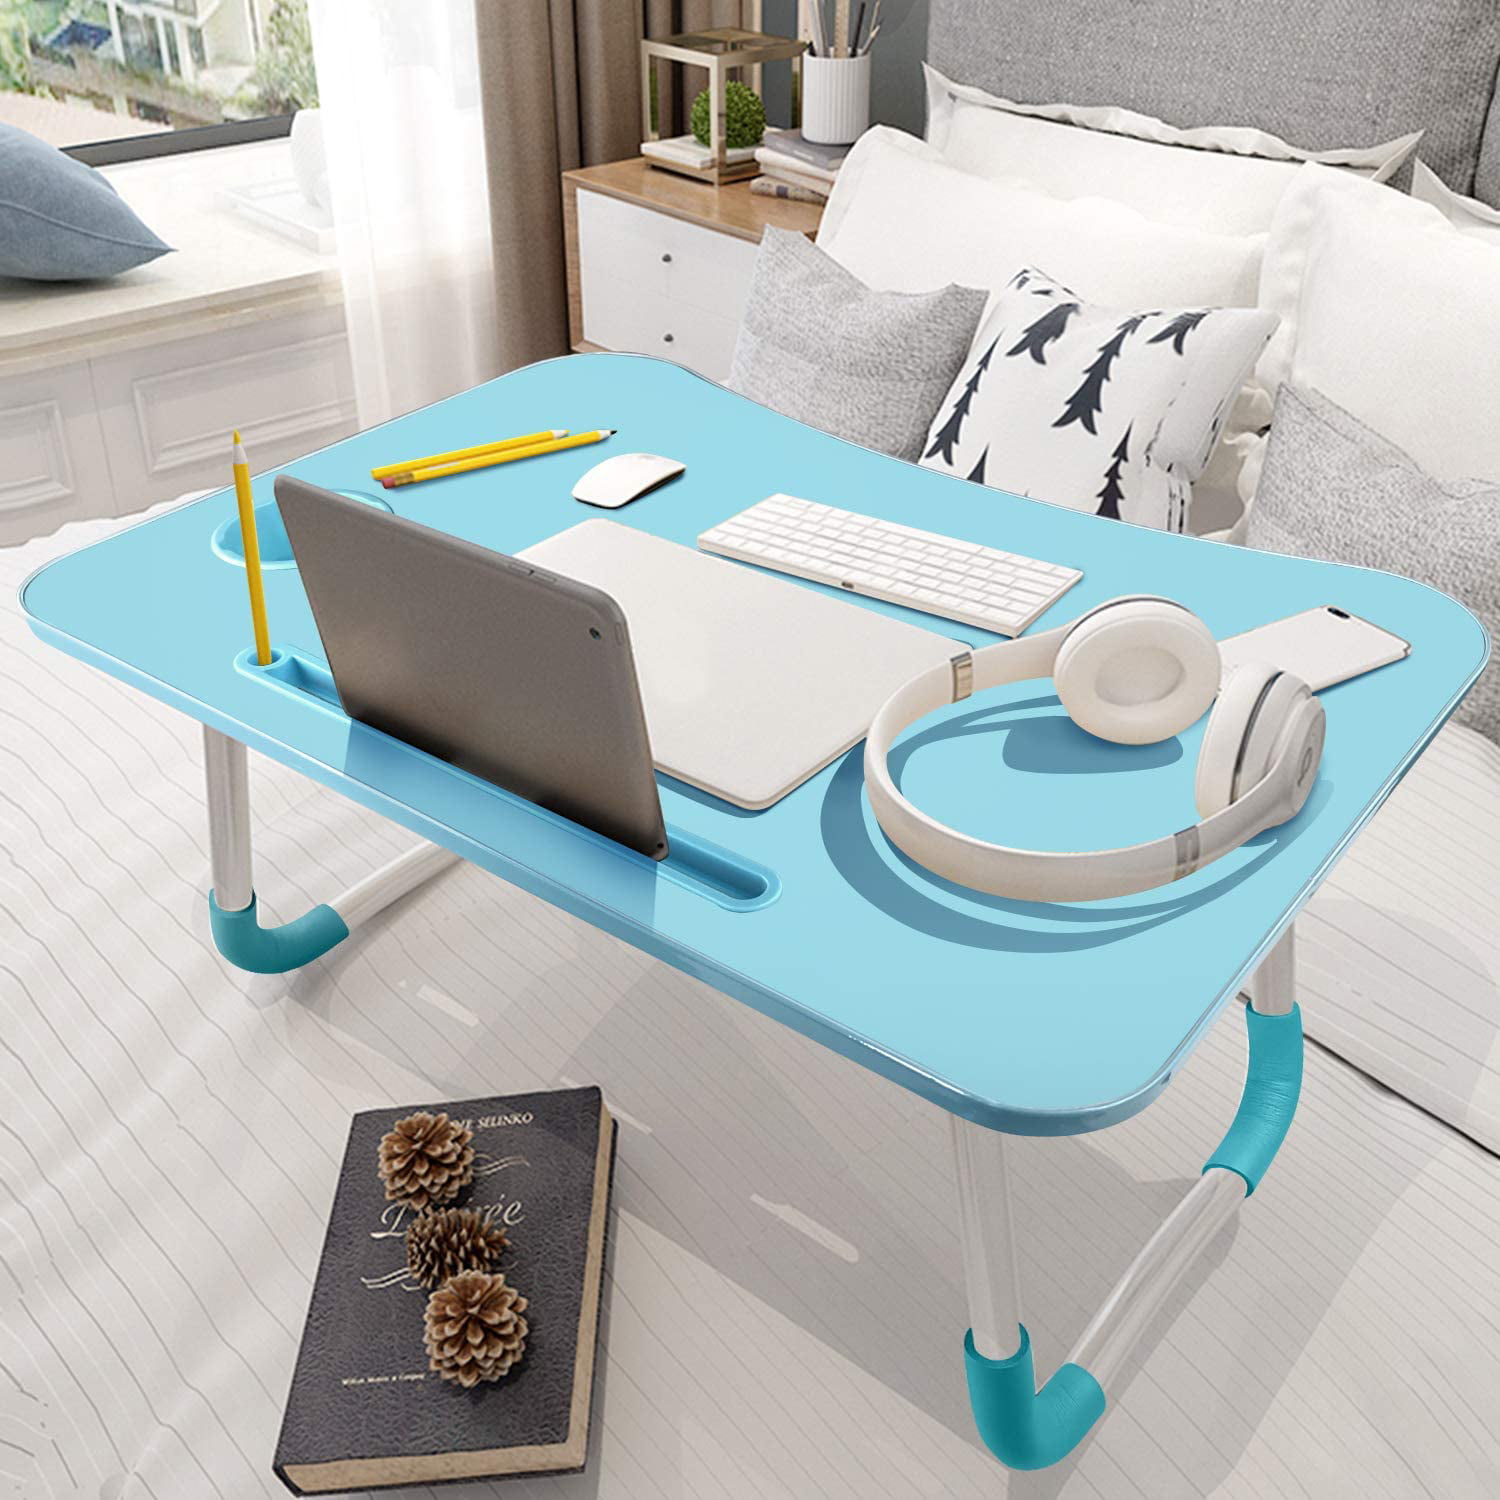 Fordable Lap Desk with Cup Slot & Notebook Stand Breakfast Bed Trays for Eating and Laptops Book Holder Lap Desk for Floor,Couch White Bed Sofa Terrace Balcony KPX Portable Laptop Bed Table 